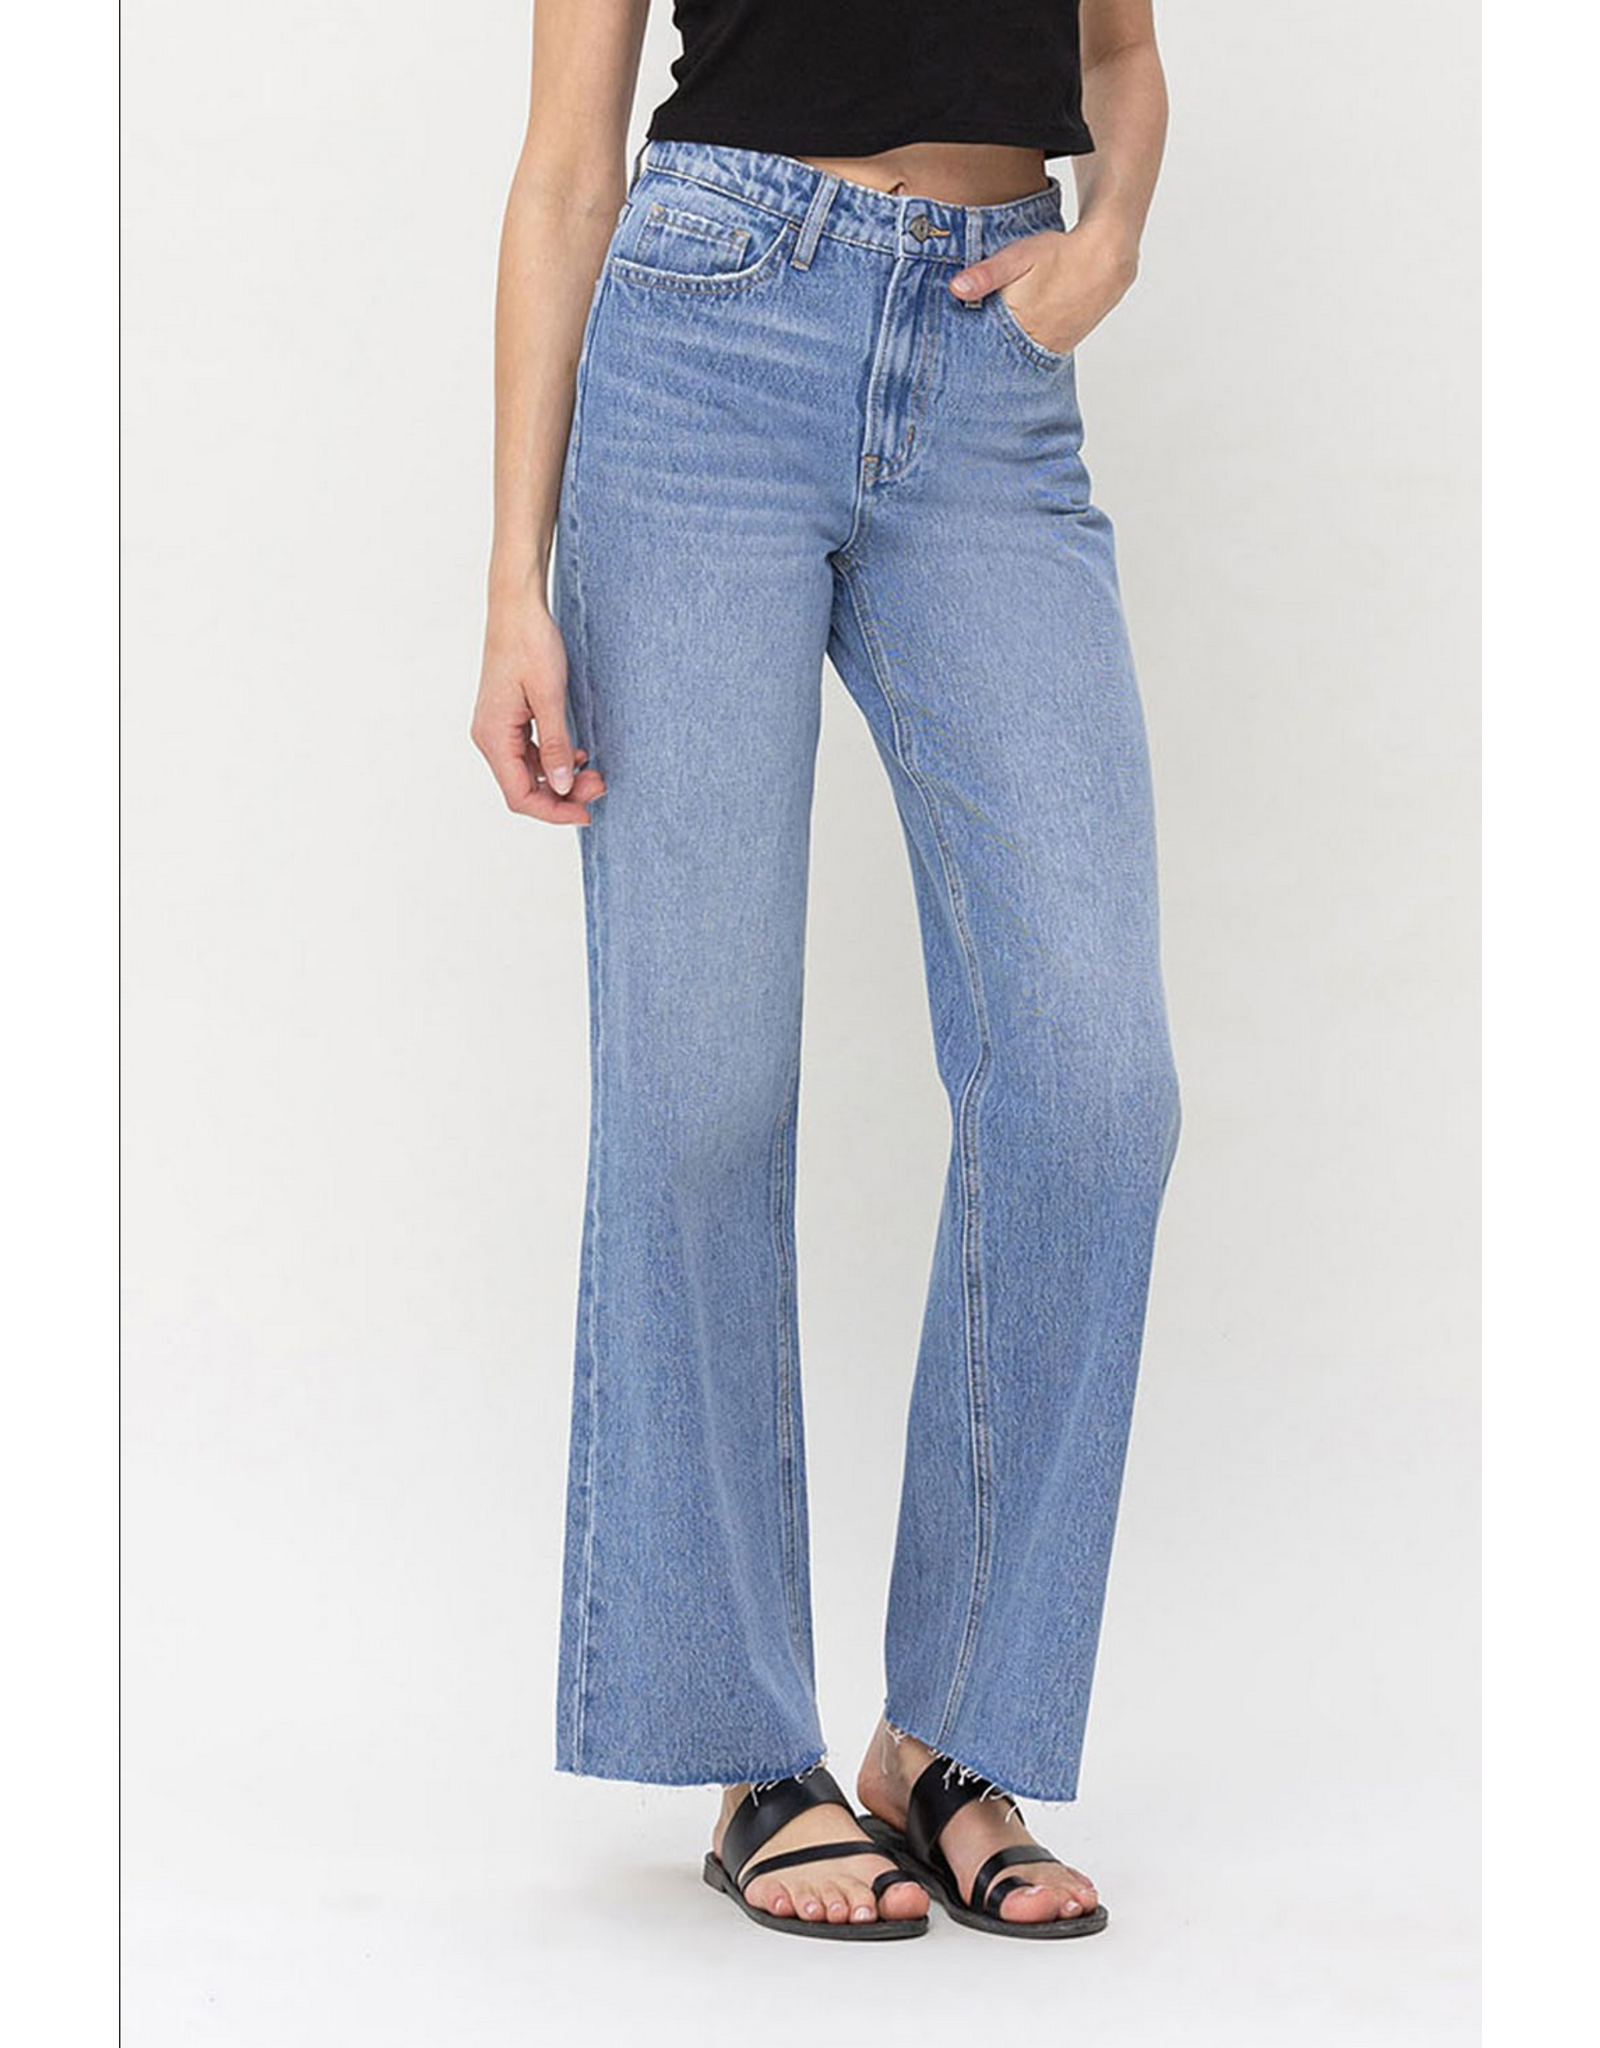 90's Super High Rise Loose Fit Jeans from Vervet by Flying Monkey